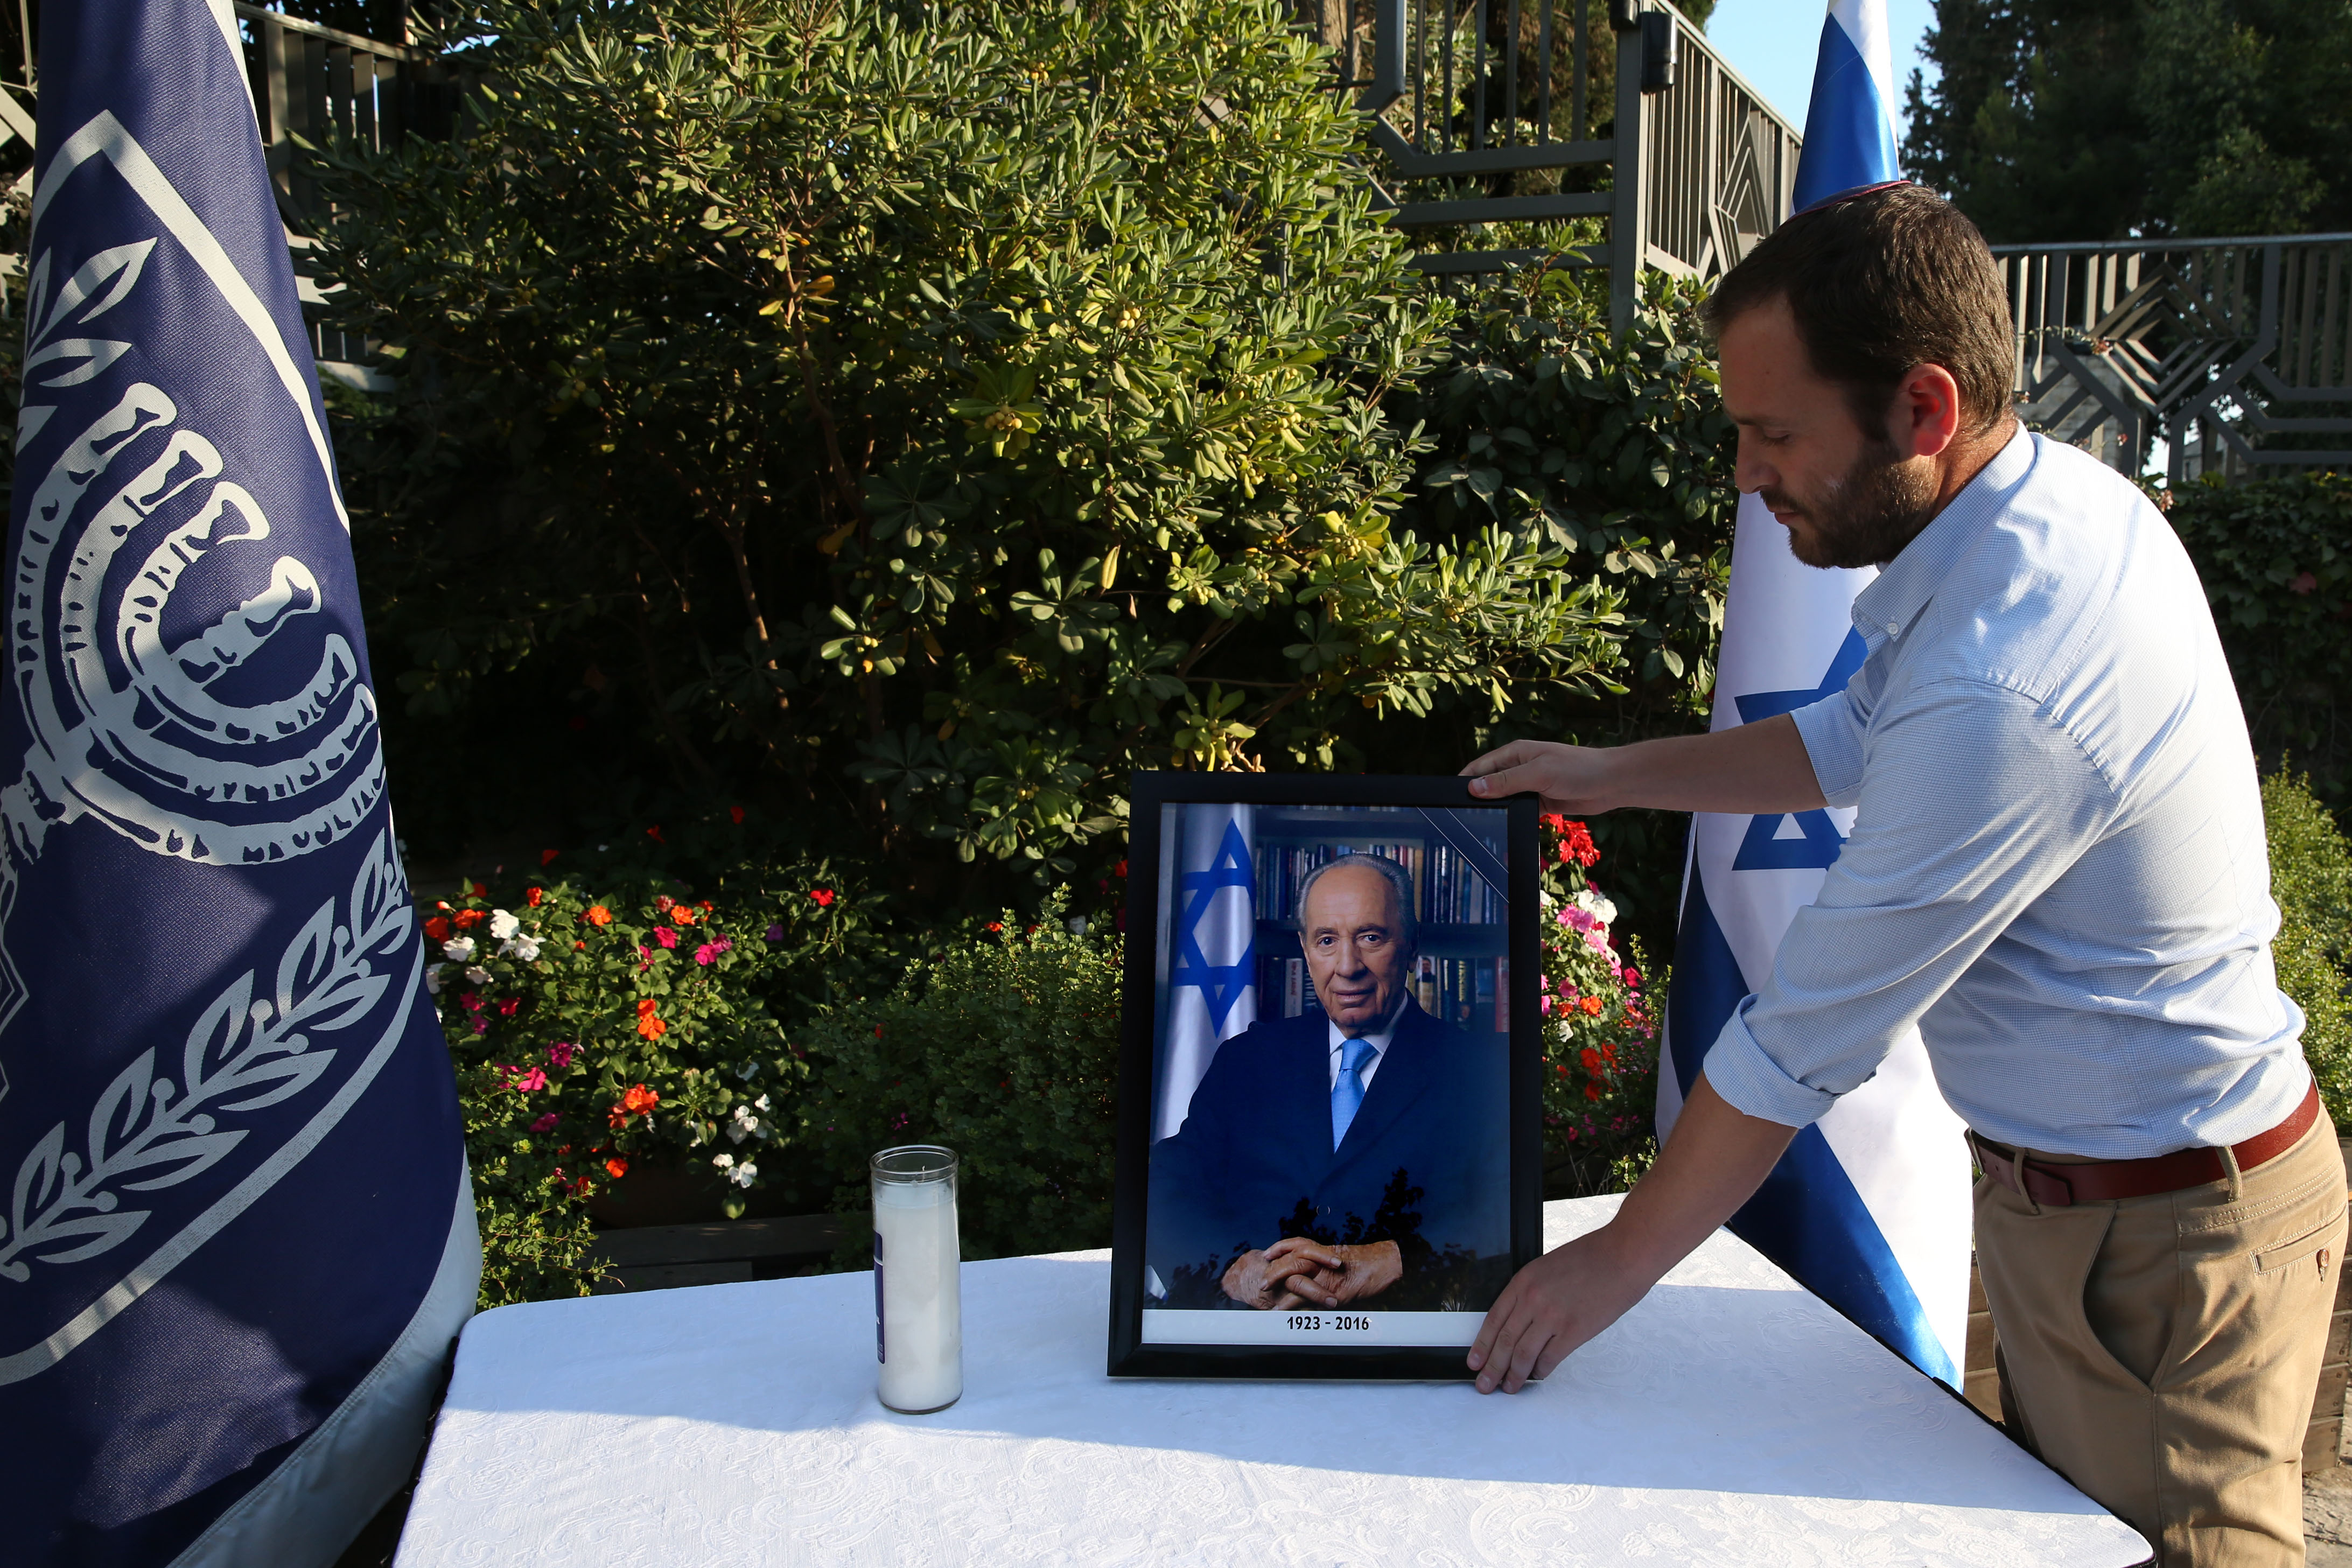 A worker of the Israeli President office places a picture of former Israeli president and Nobel Peace Prize winner Shimon Peres displayed after his death outside the presidential compound in Jerusalem, on September 28, 2016. Israel and global leaders mourned the death of ex-president and Nobel Peace Prize winner Shimon Peres on September 28, 2016 as the country prepared for a funeral expected to be attended by major world figures. Peres, who was 93, held nearly every major office in the country, serving twice as prime minister and also as president, a mostly ceremonial role, from 2007 to 2014.  / AFP PHOTO / GALI TIBBON